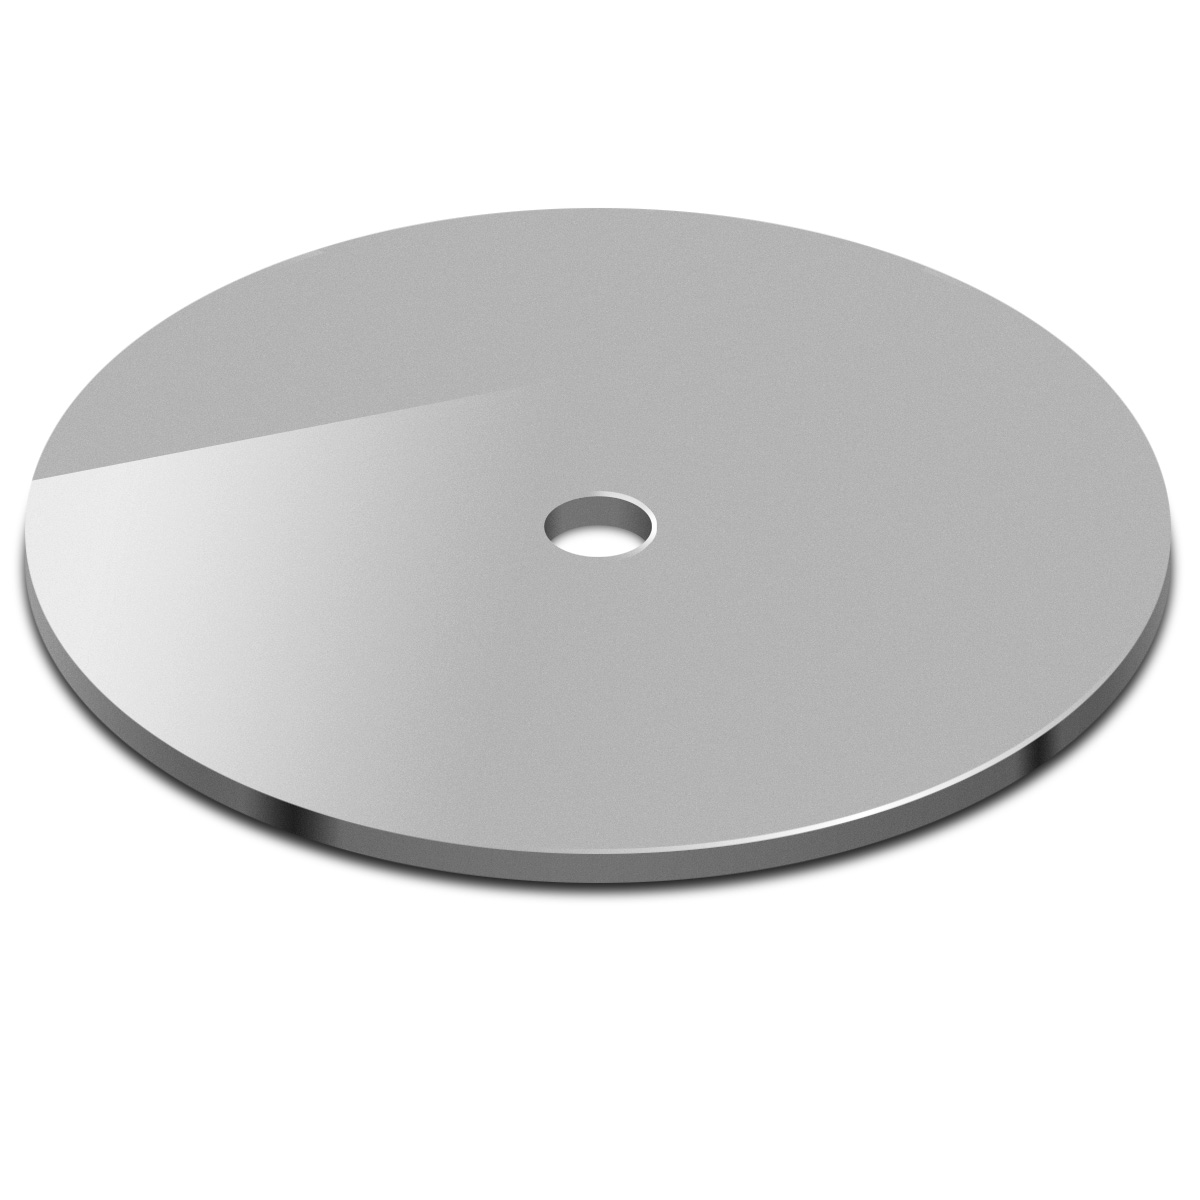 Bergeon 7745-P mirror disc for removing too